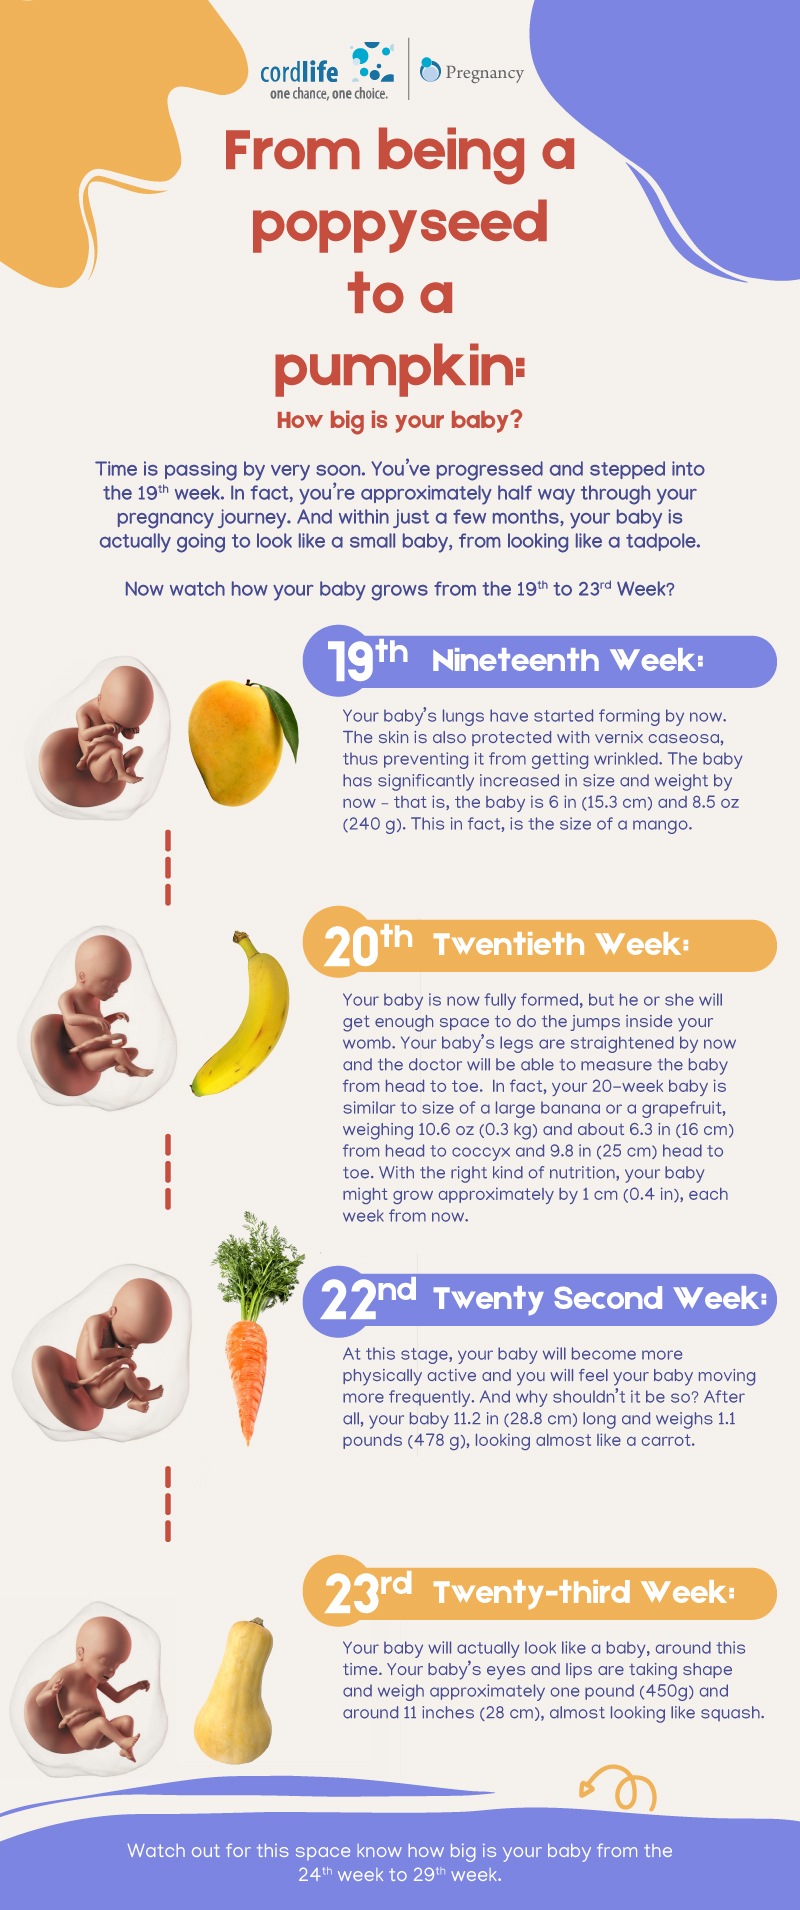 How Big is your baby? Part 4